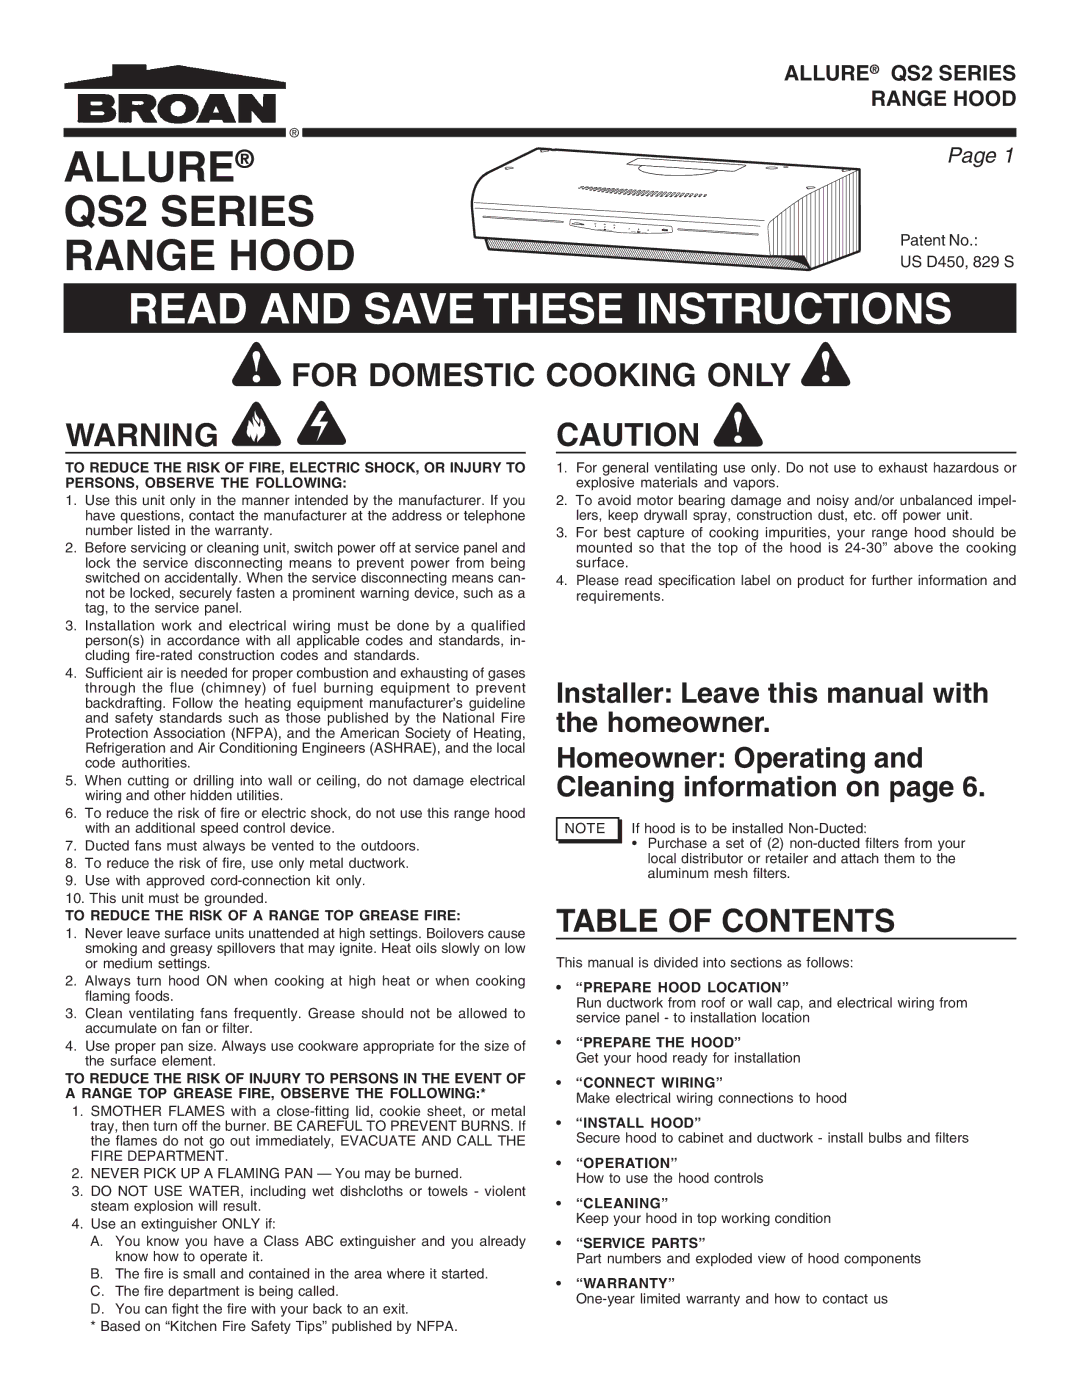 Broan QS2 warranty For Domestic Cooking only, Table of Contents 